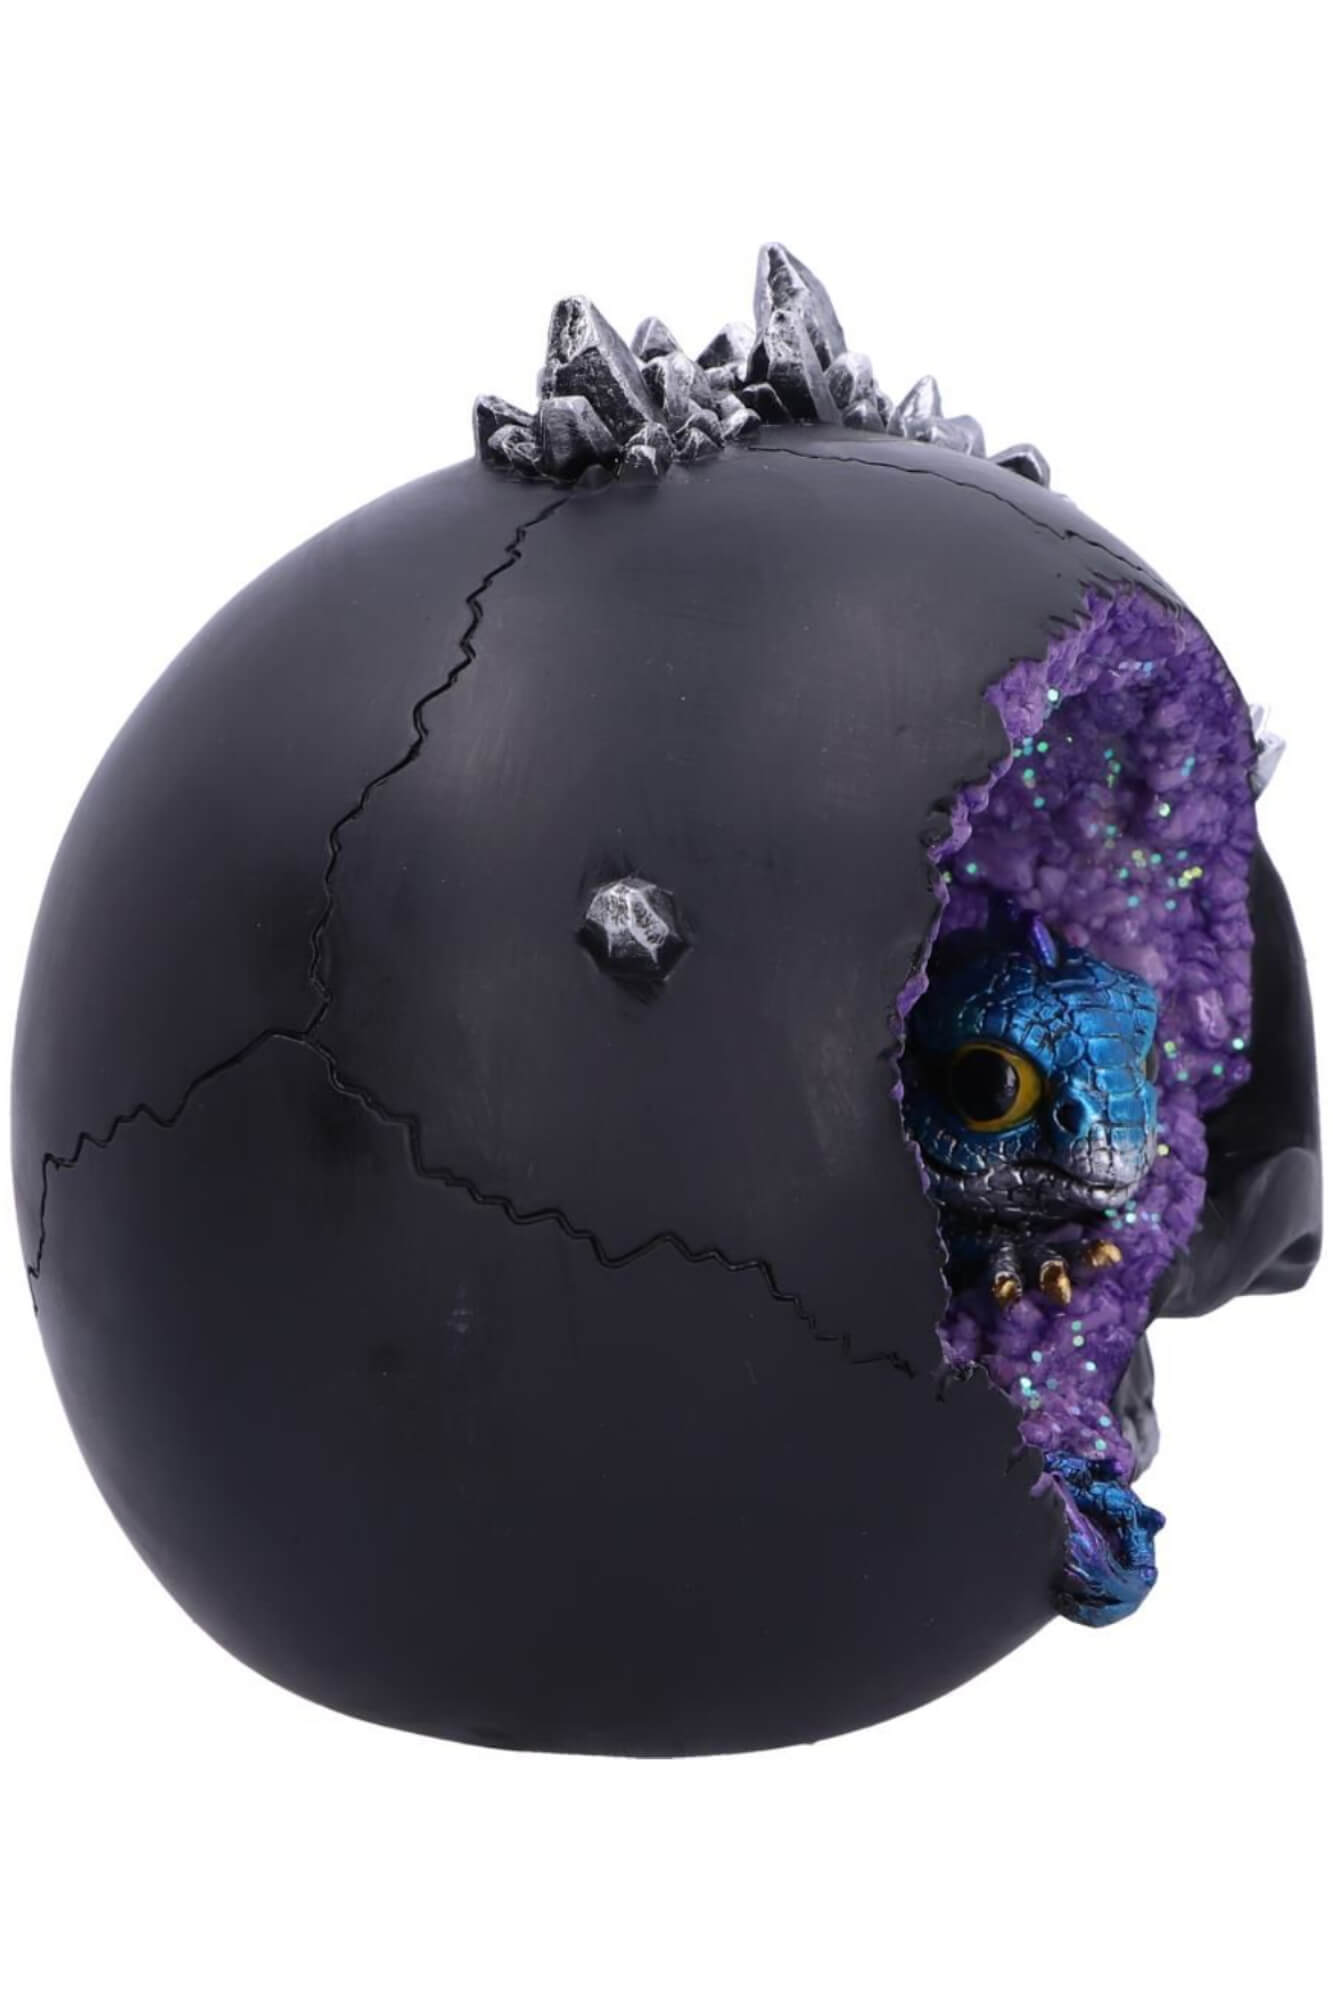 Nemesis Now Crystal Cave Small Dragon Hiding within a Crystal Skull 16.5cm